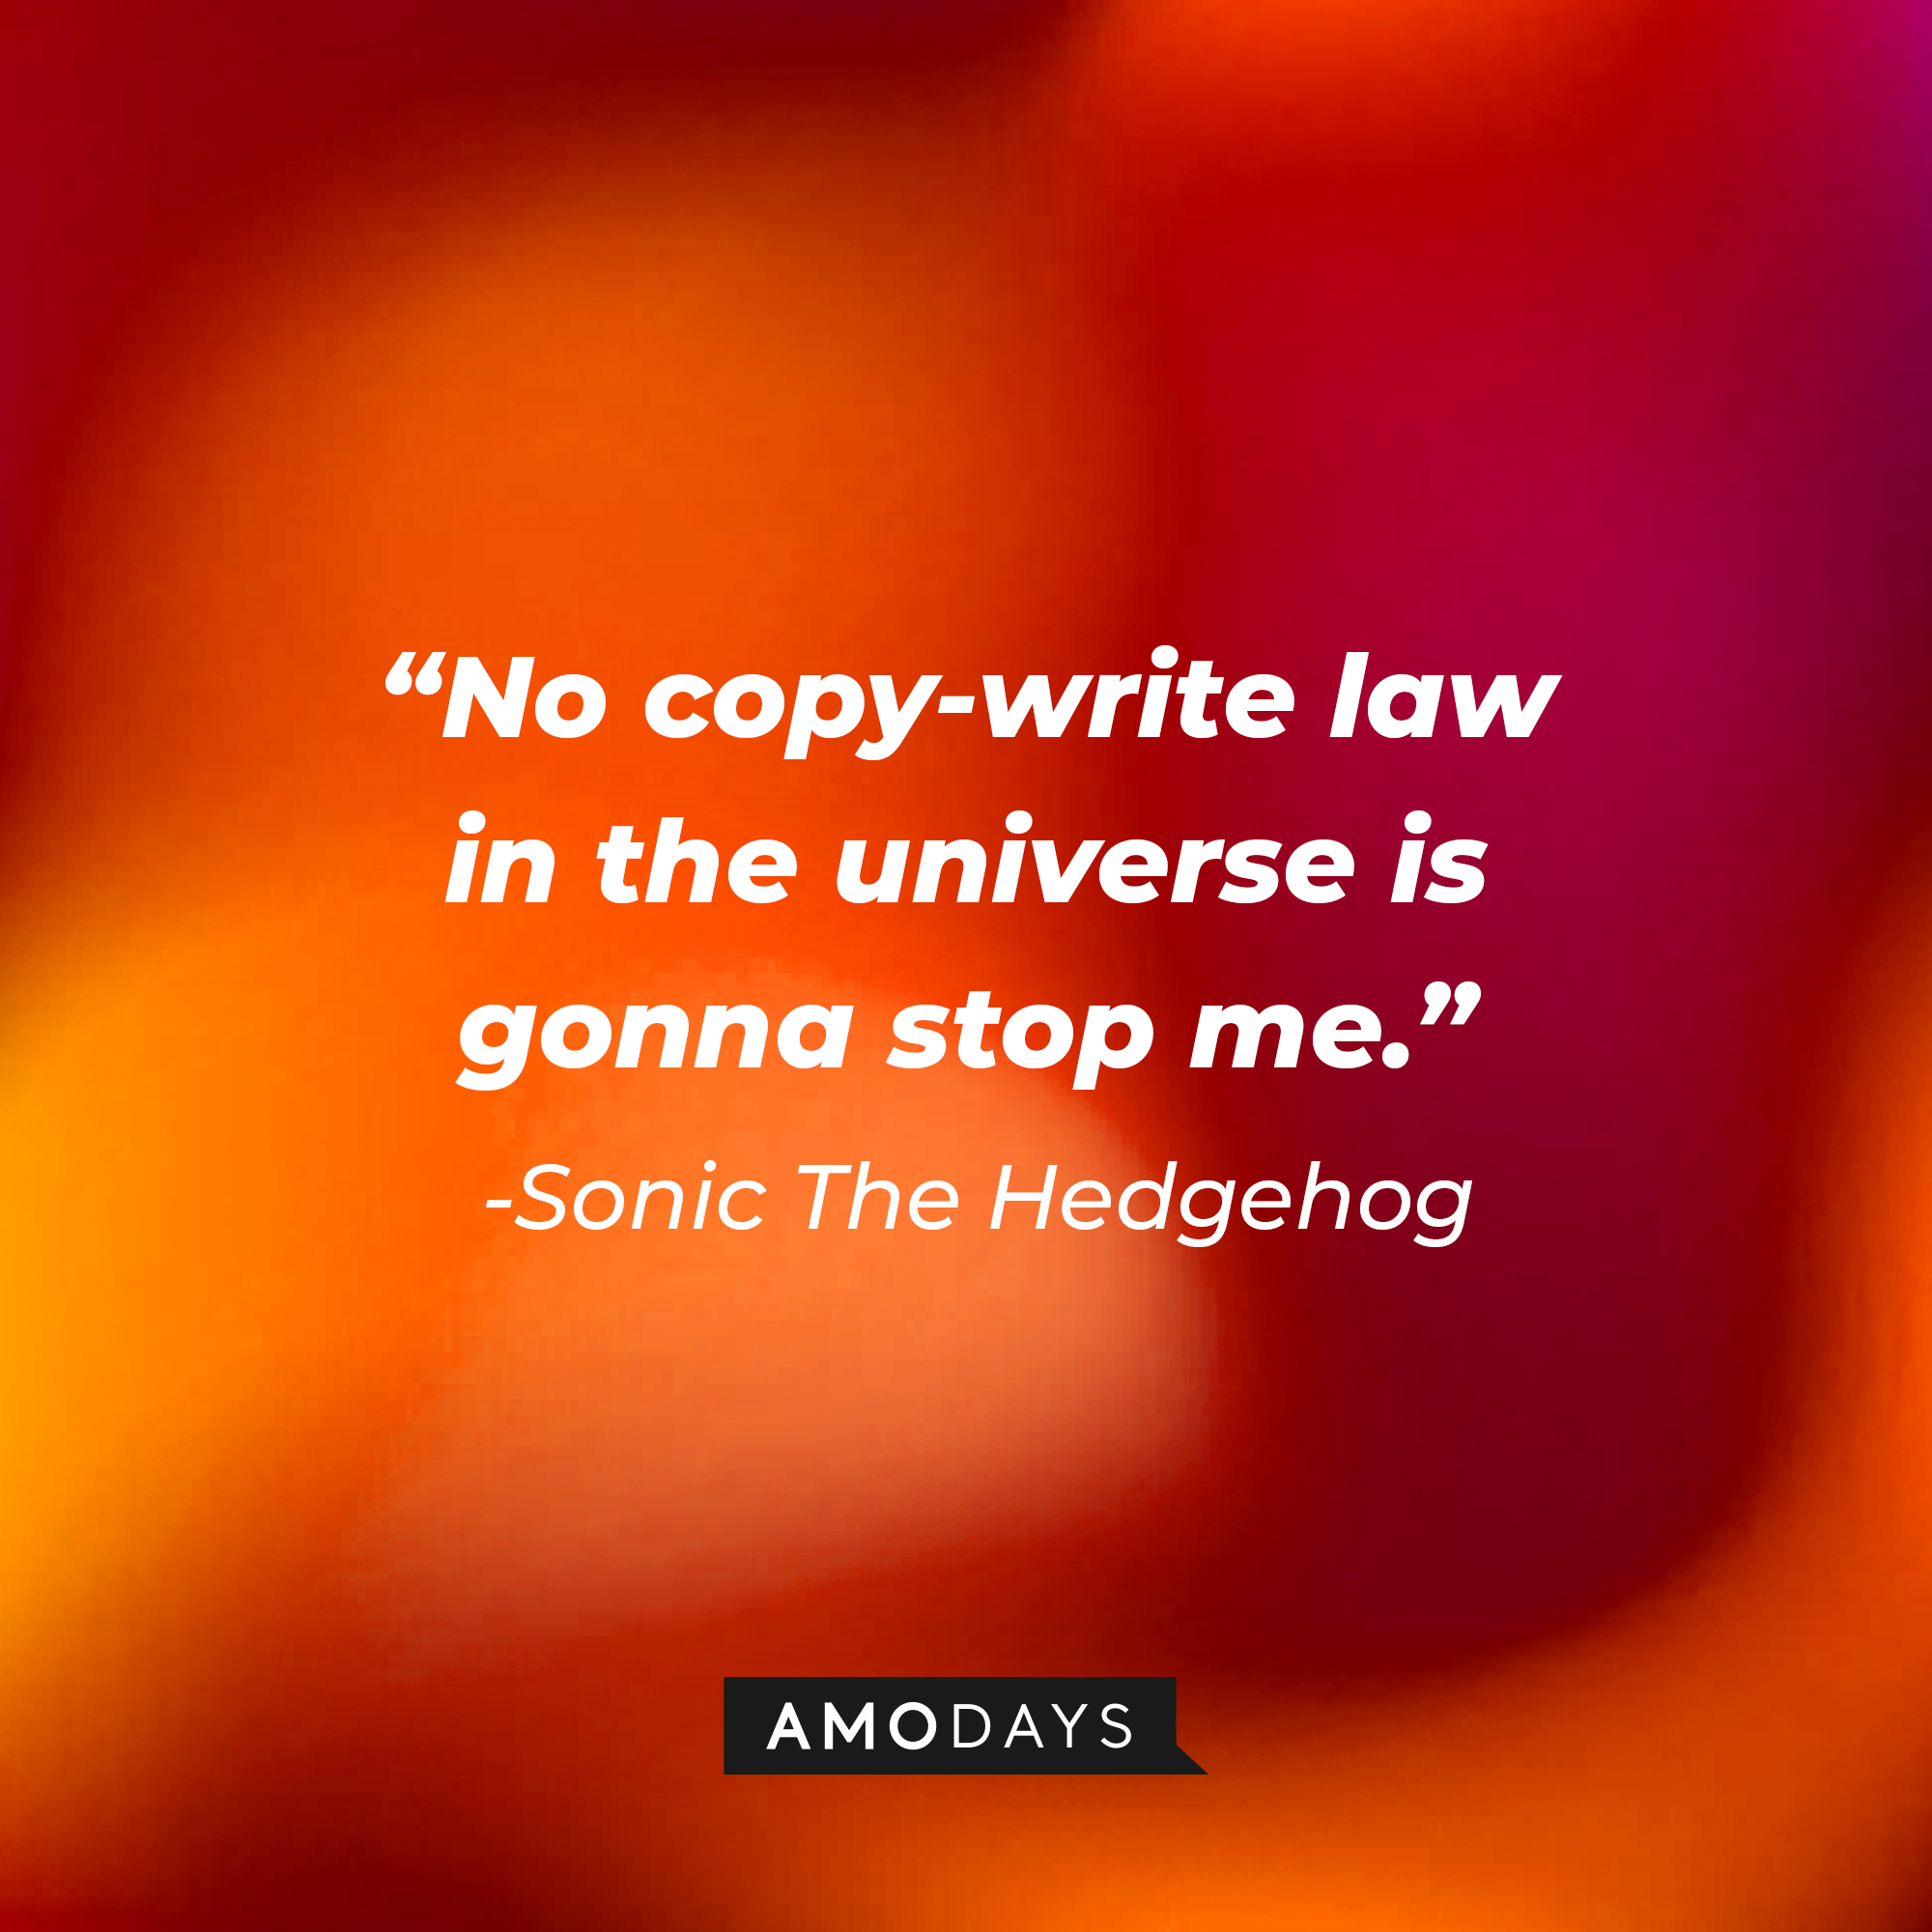 Sonic The Hedgehog's quote: "No copy-write law in the universe is gonna stop me." | Source: Amodays